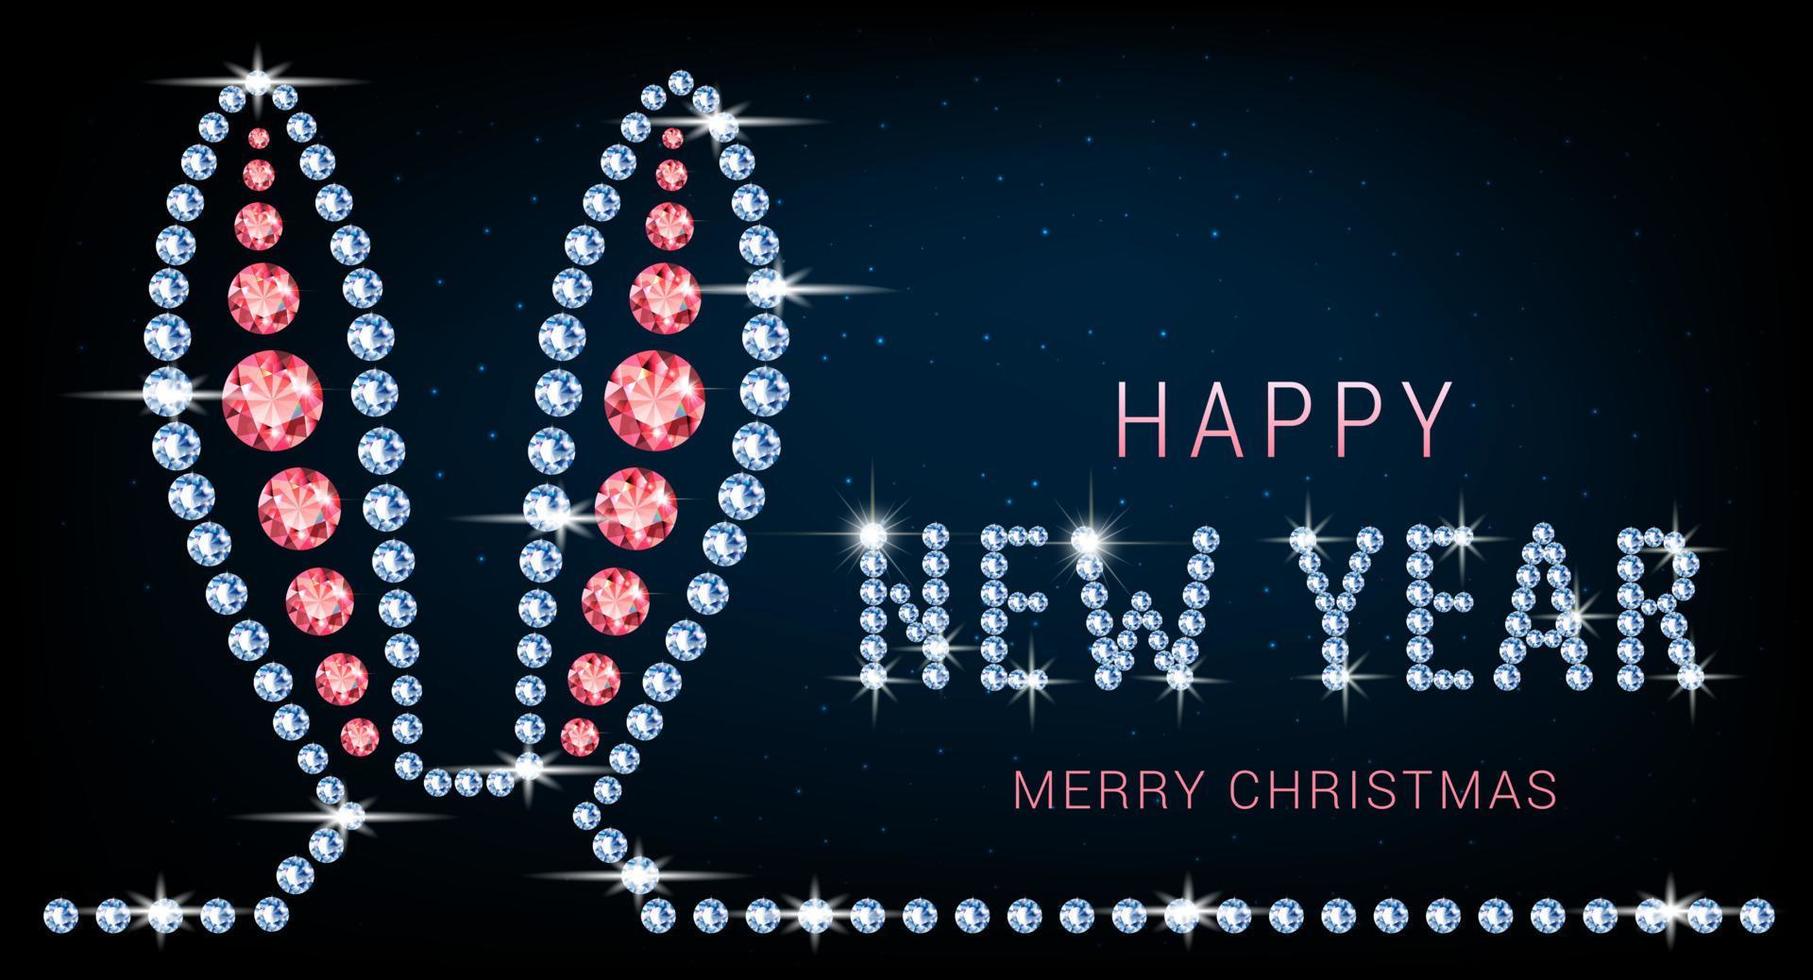 Banner with rabbit ears made of diamonds. Jewelry decorations for Christmas and New Year according to the Chinese calendar. On a neon blue background with bright stars. Vector. vector